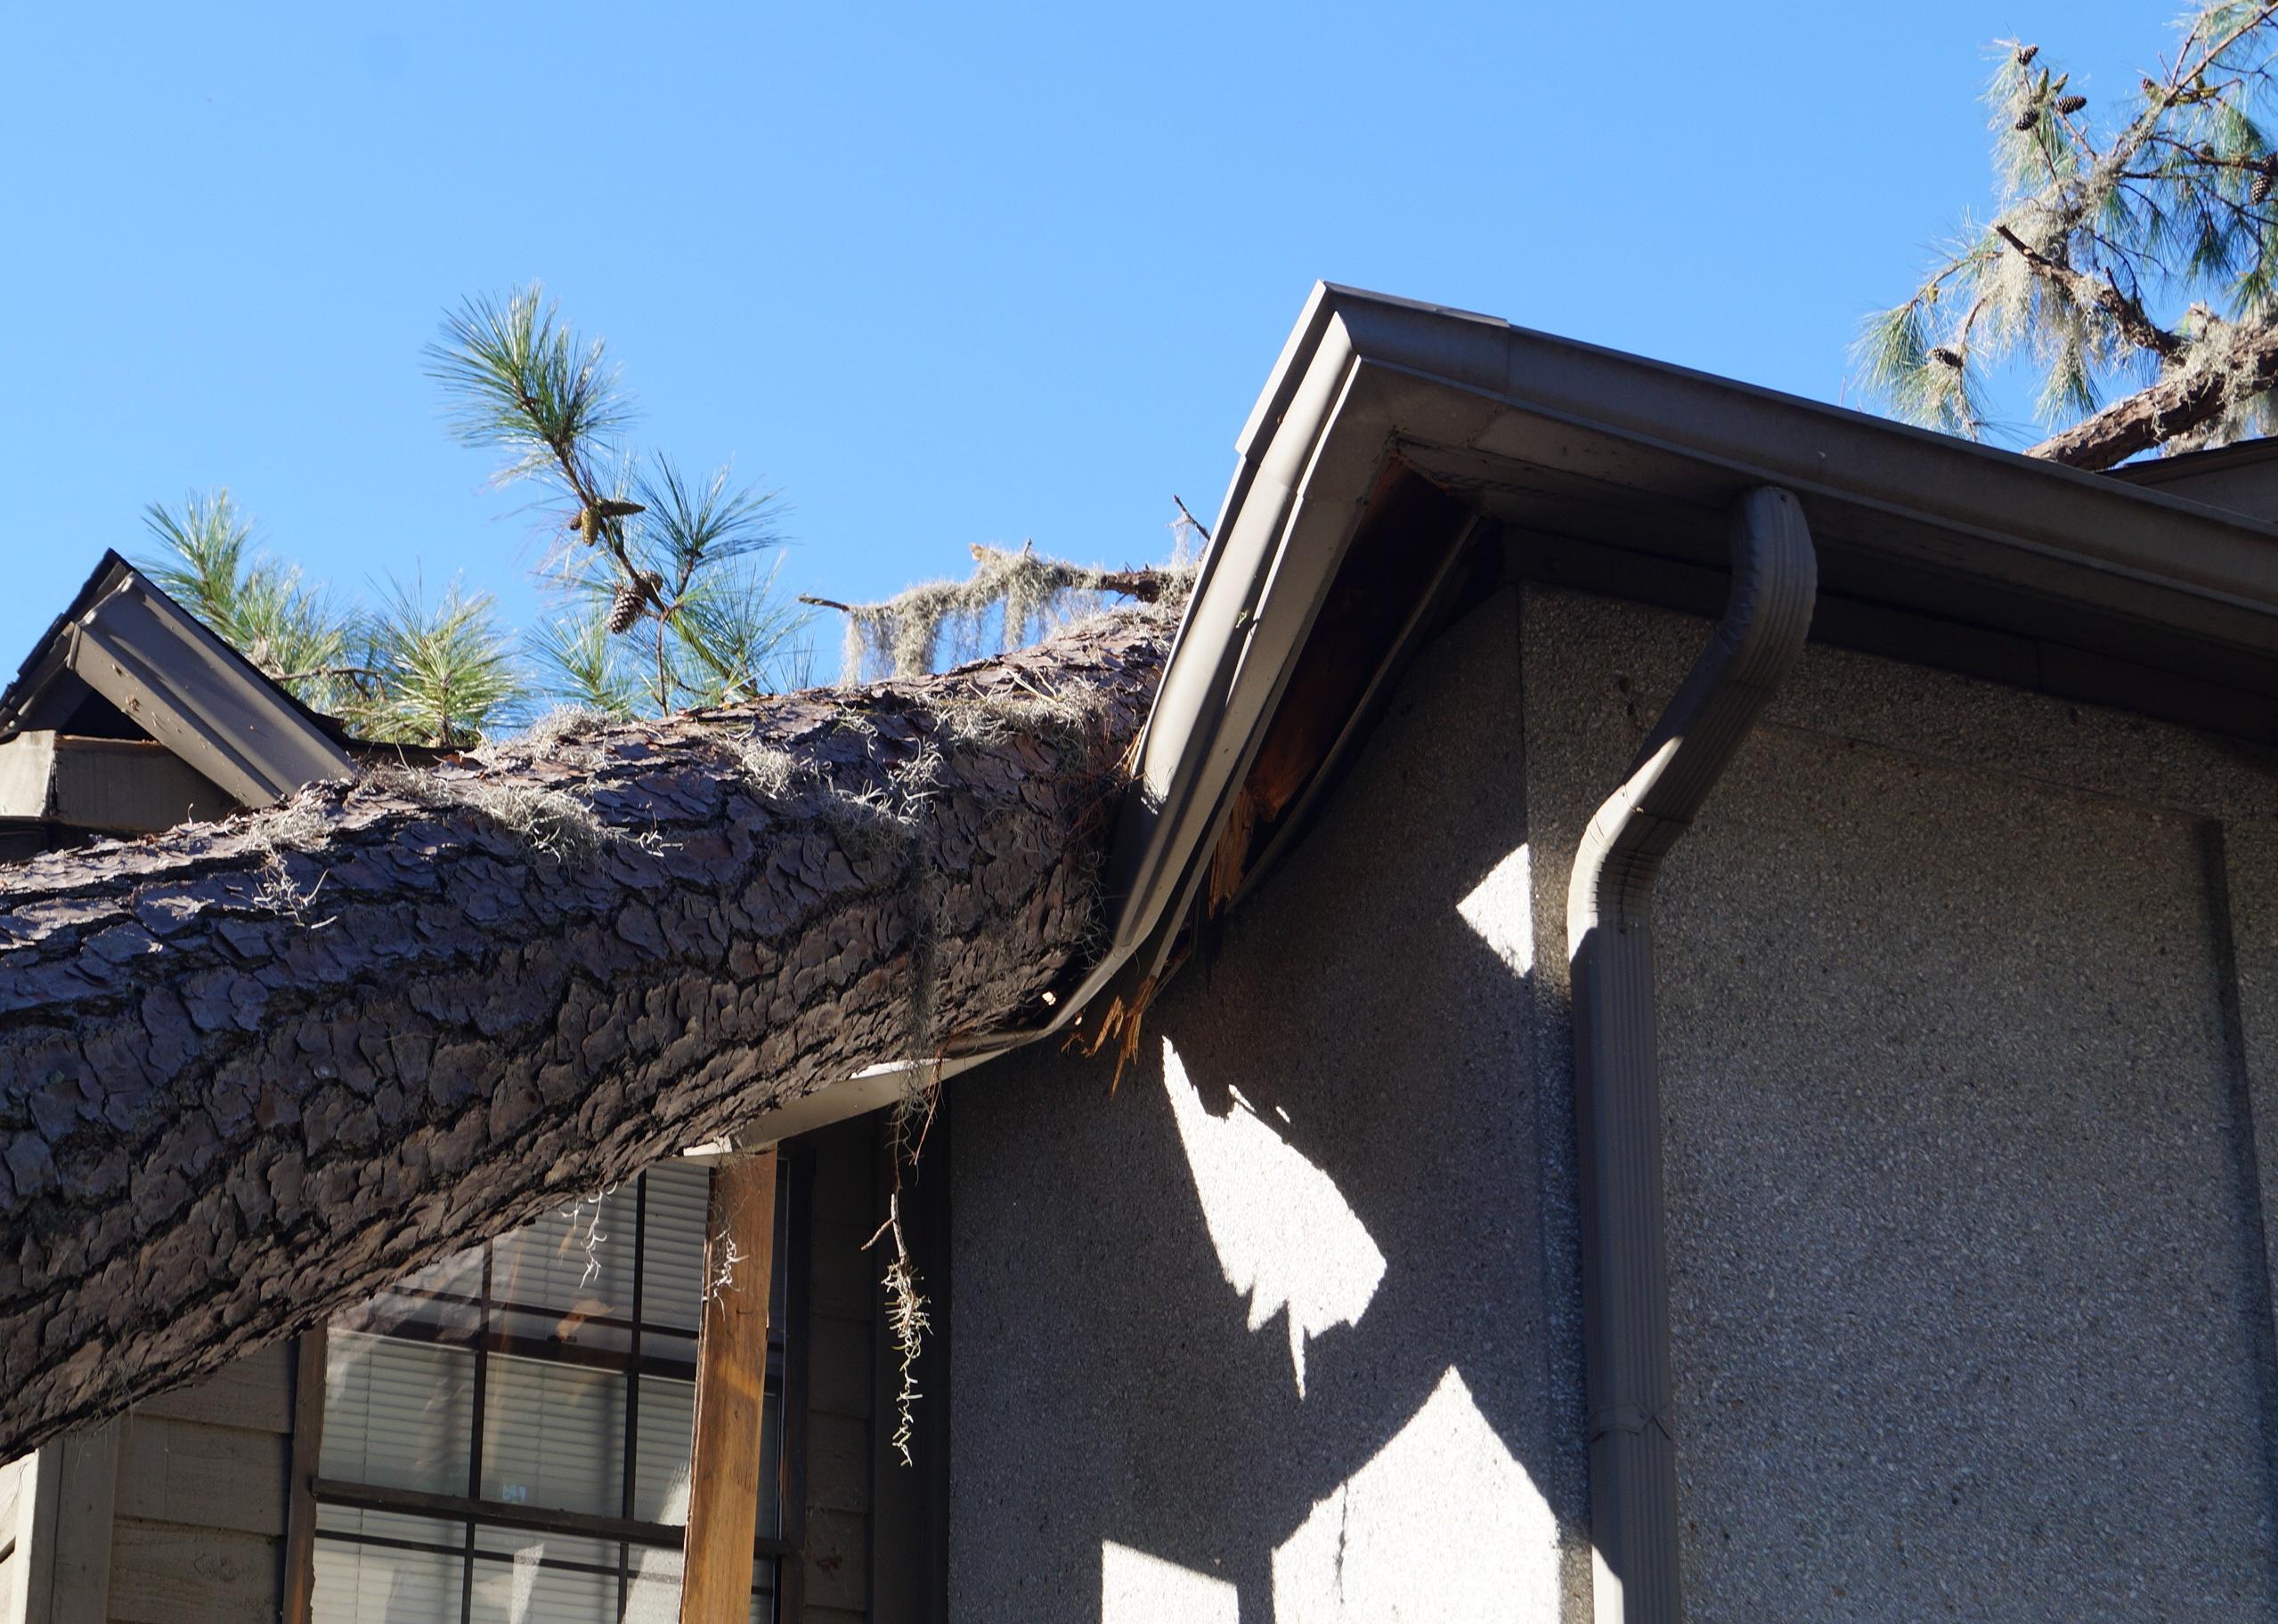 Roof damage from tree that fell over during hurricane storm.